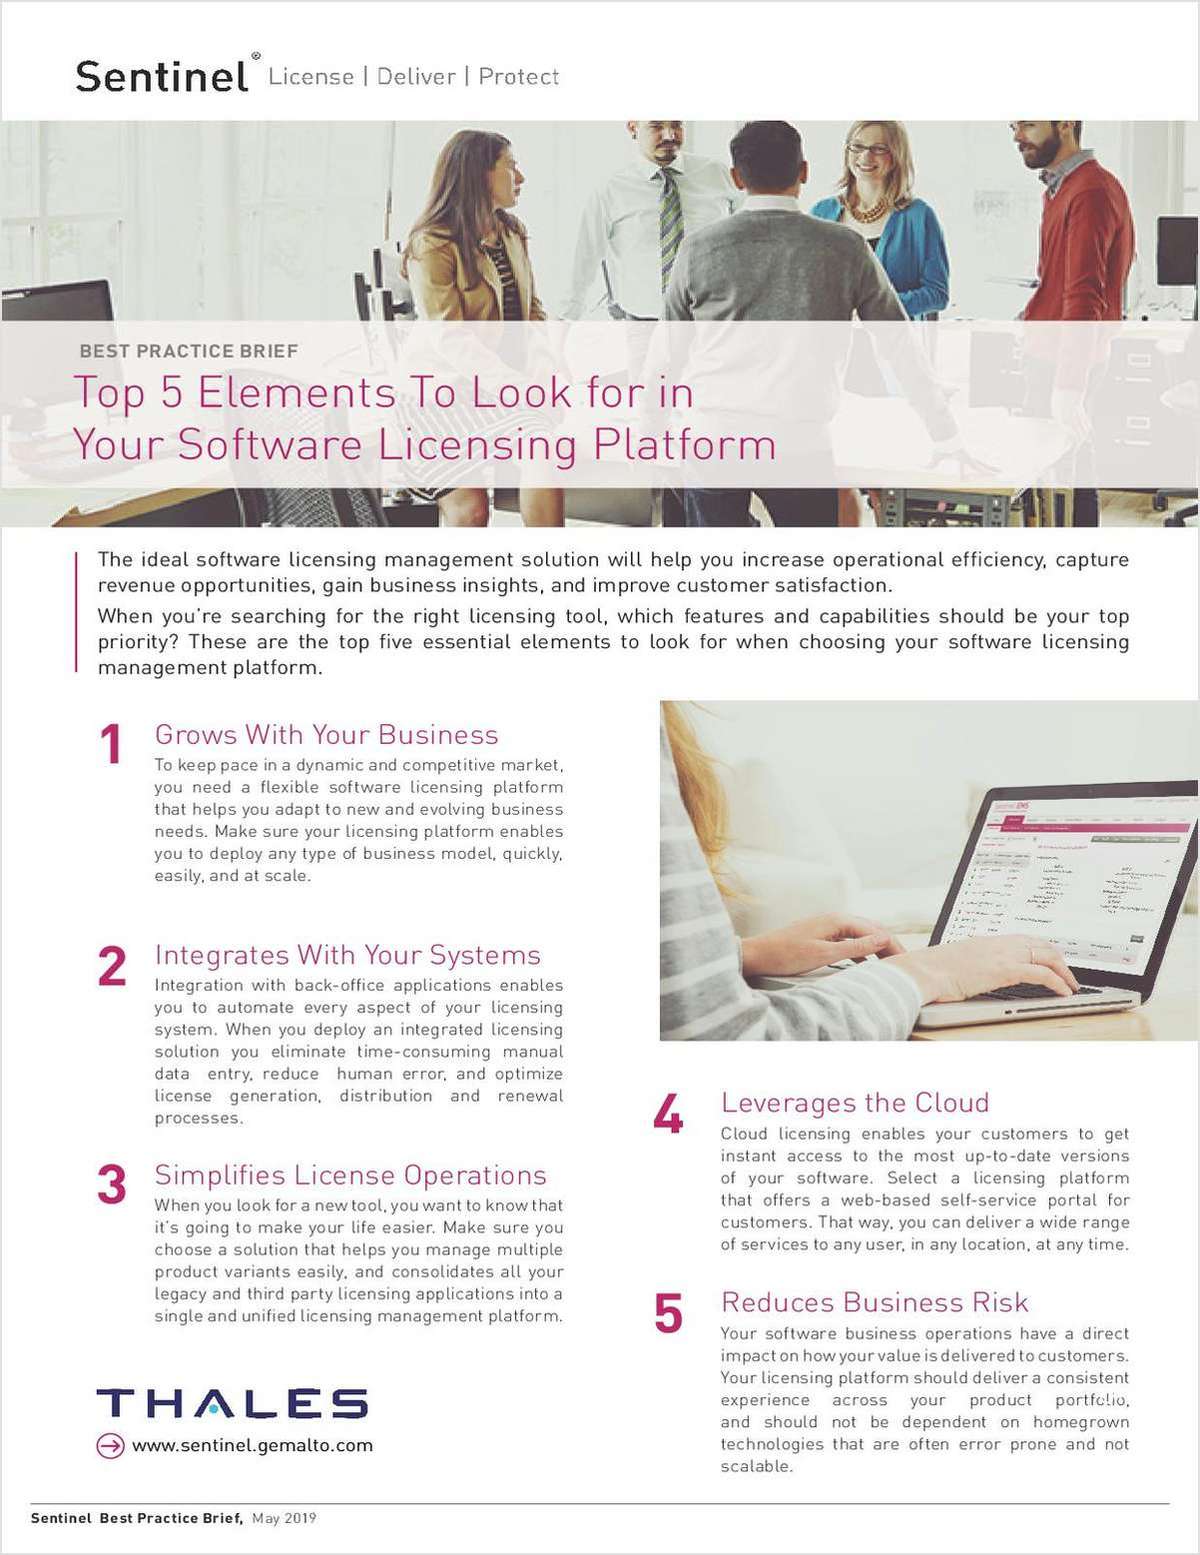 The Top Five Elements To Look for in a Software Licensing Platform